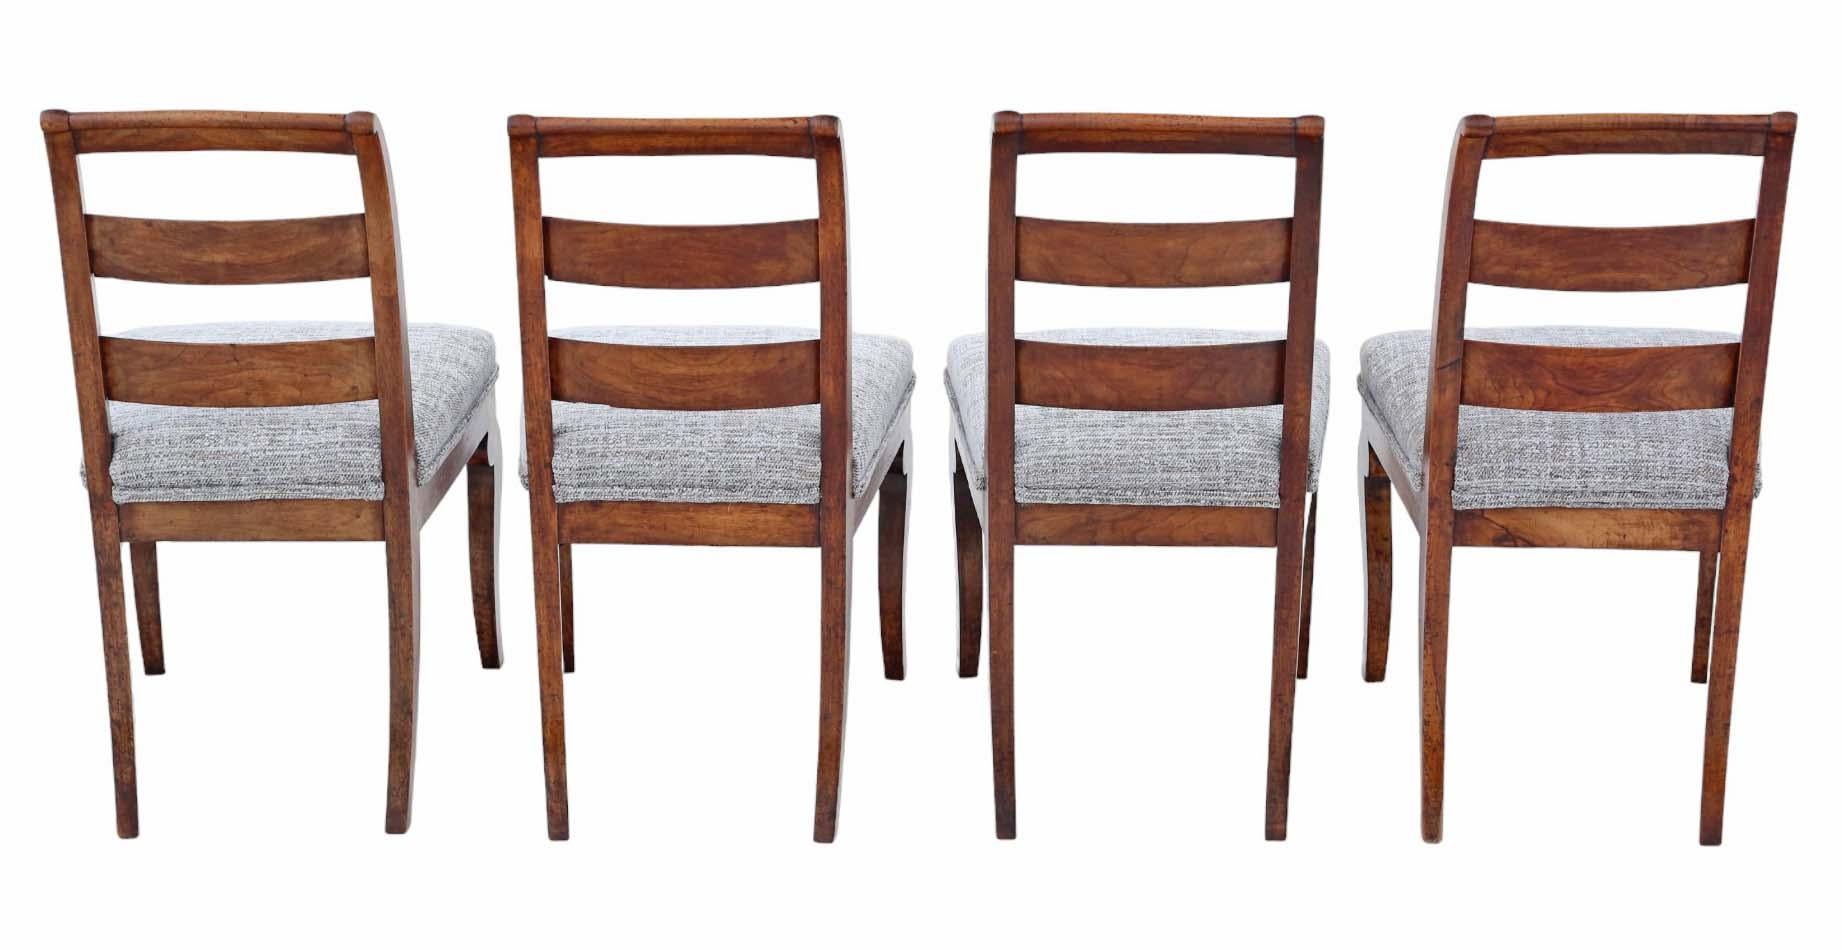 Antique set of 4 high-quality 19th-century fruitwood dining chairs. These chairs feature delightful compact proportions and showcase the finest coloration and patina.

They are free from loose joints or woodworm. The upholstery is not new but